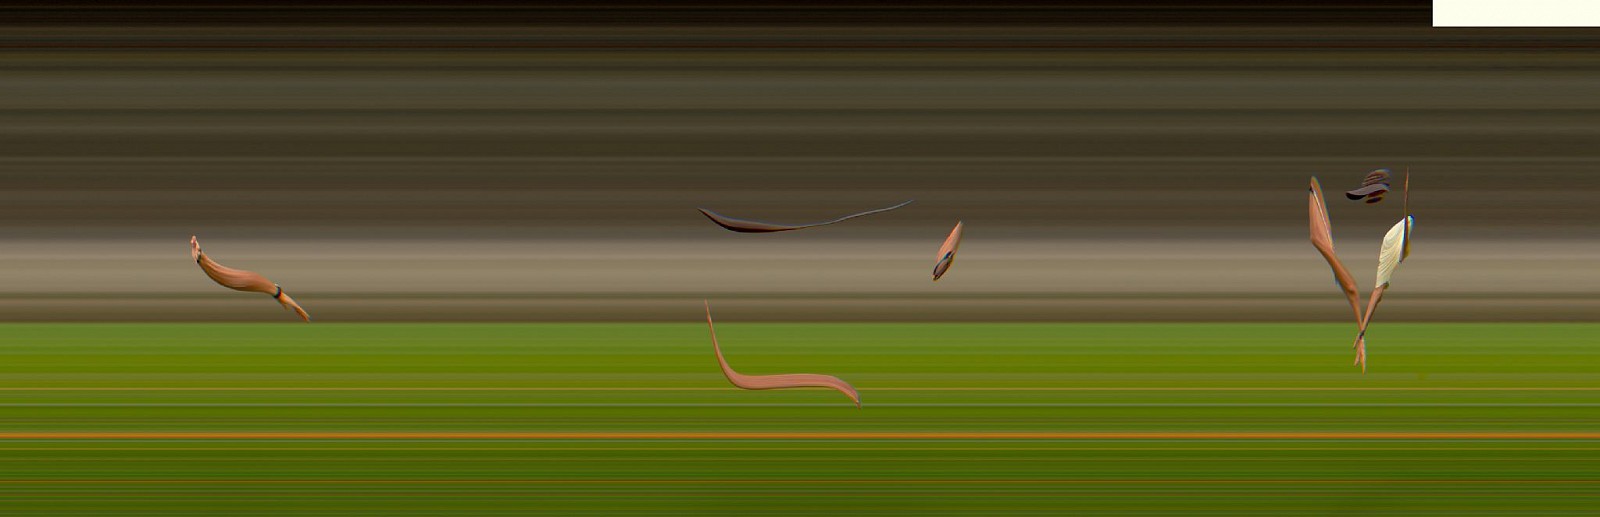 Jay Mark Johnson, TAICHI MOTION STUDY 142, 2005 Los Angeles CA
archival pigment on paper, mounted on aluminum, 40 x 123 in. (101.6 x 312.4 cm)